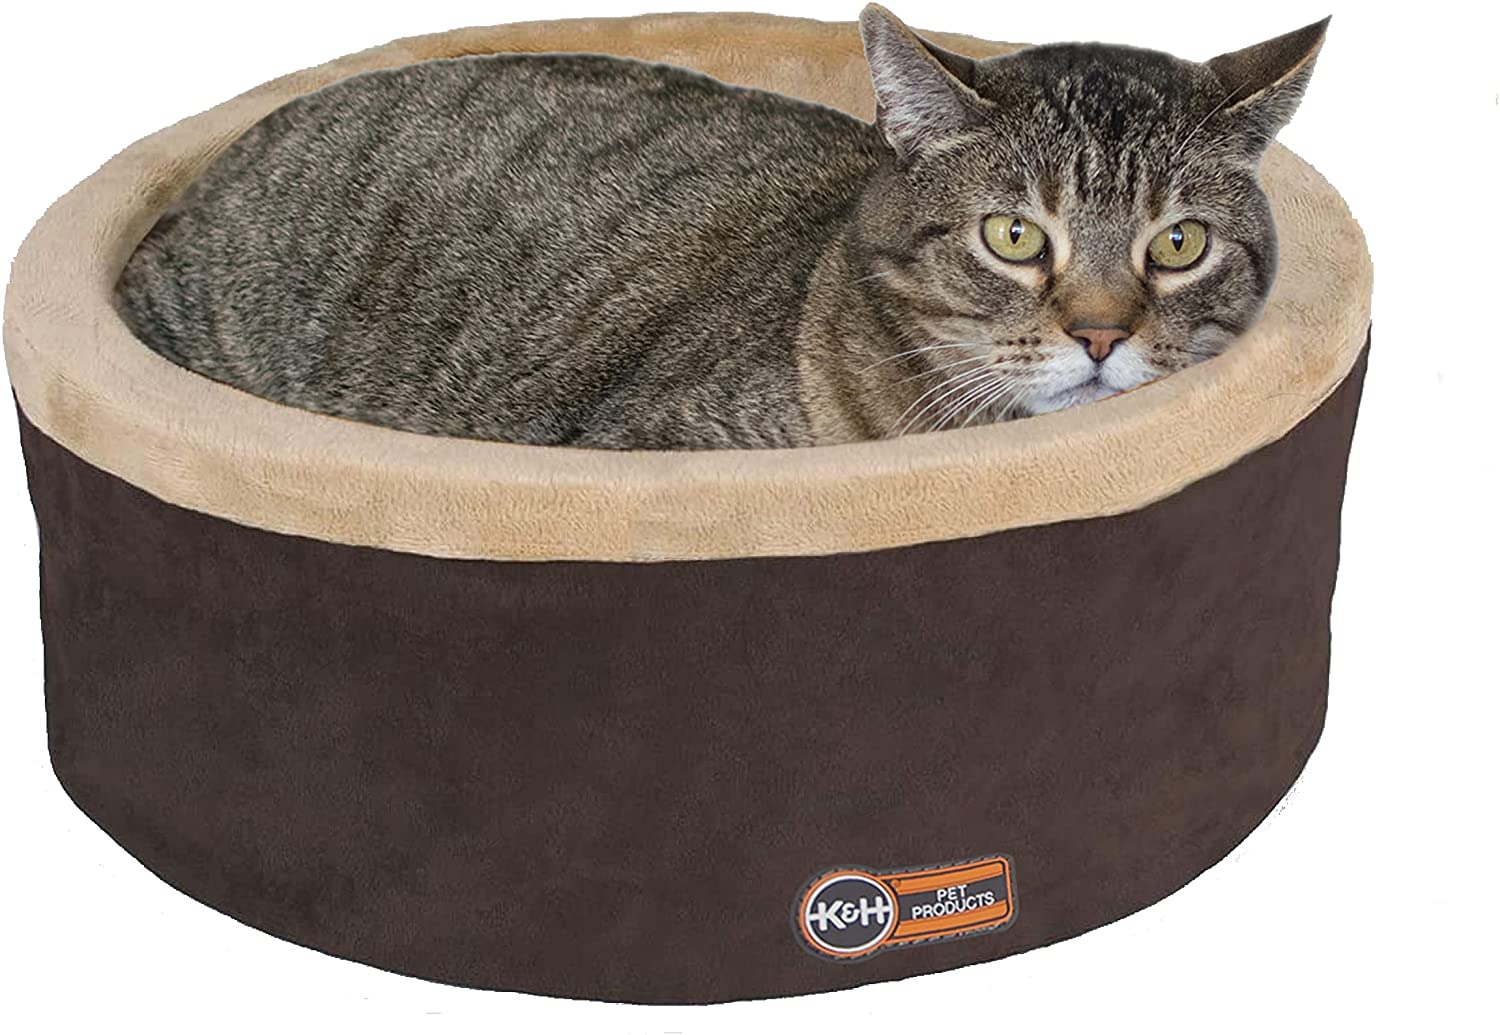 KH-Pet-Products-Heated-Thermo-Kitty-Cat-Bed